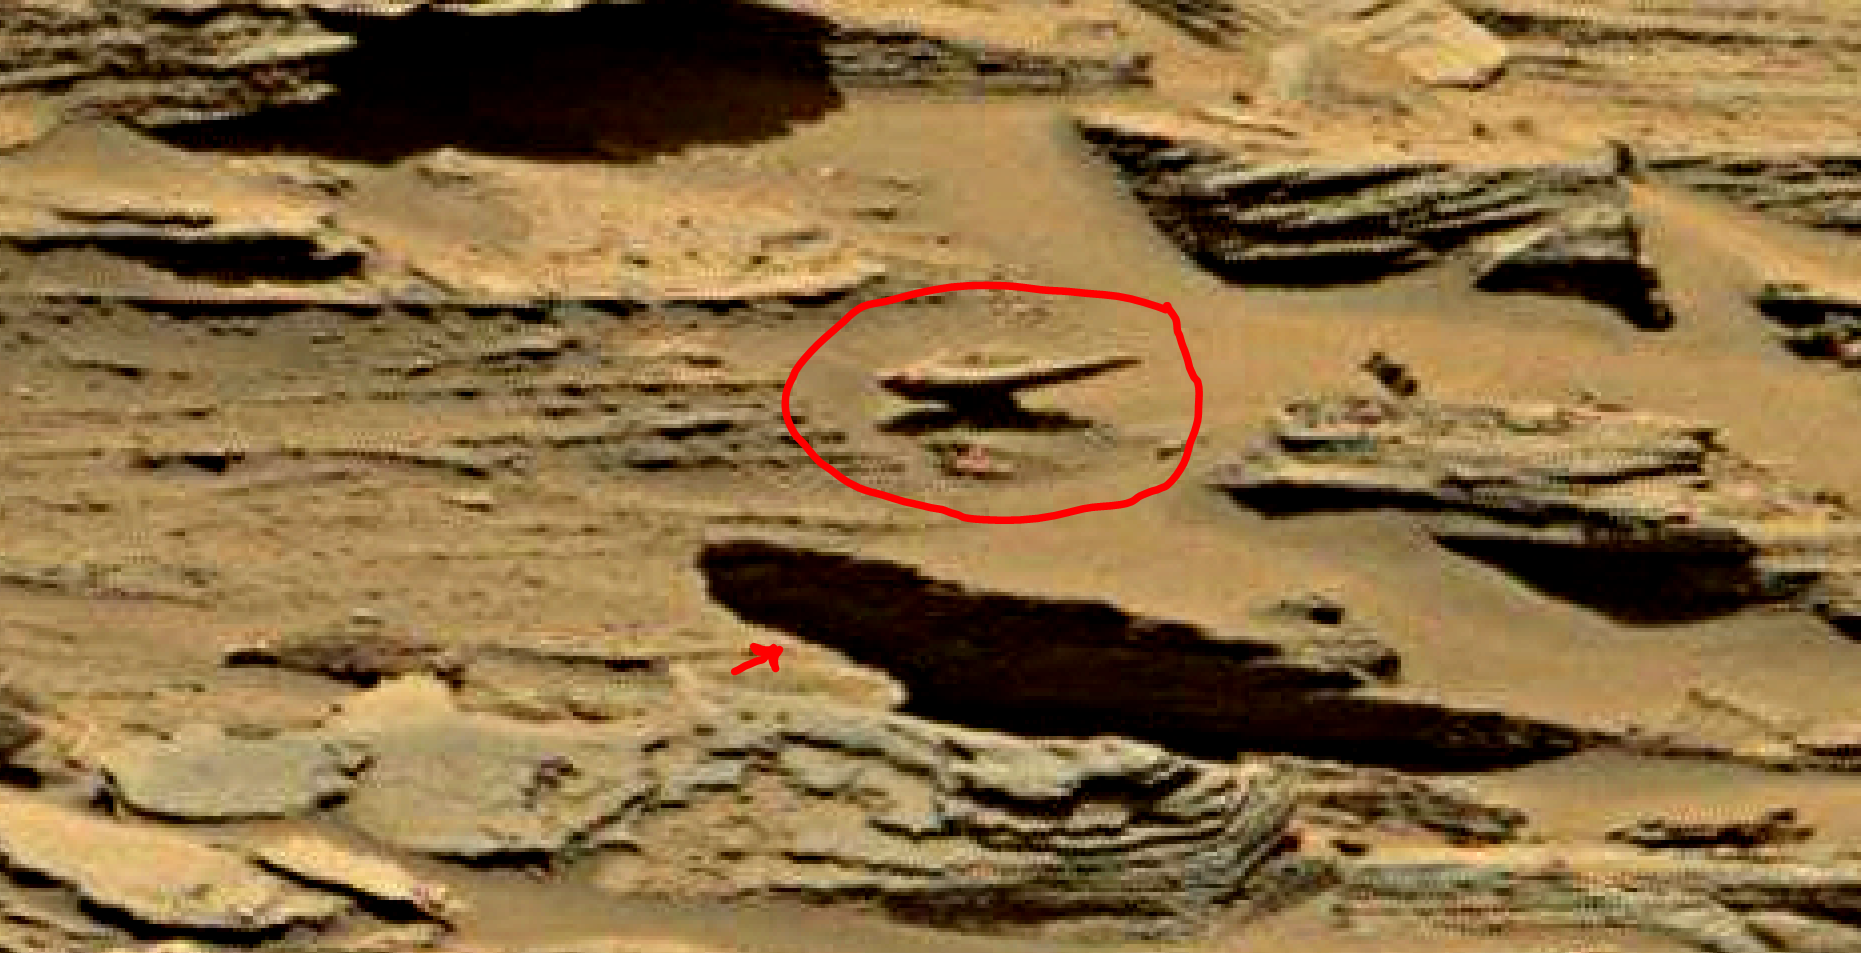 mars sol 1353 anomaly-artifacts 32a1 was life on mars